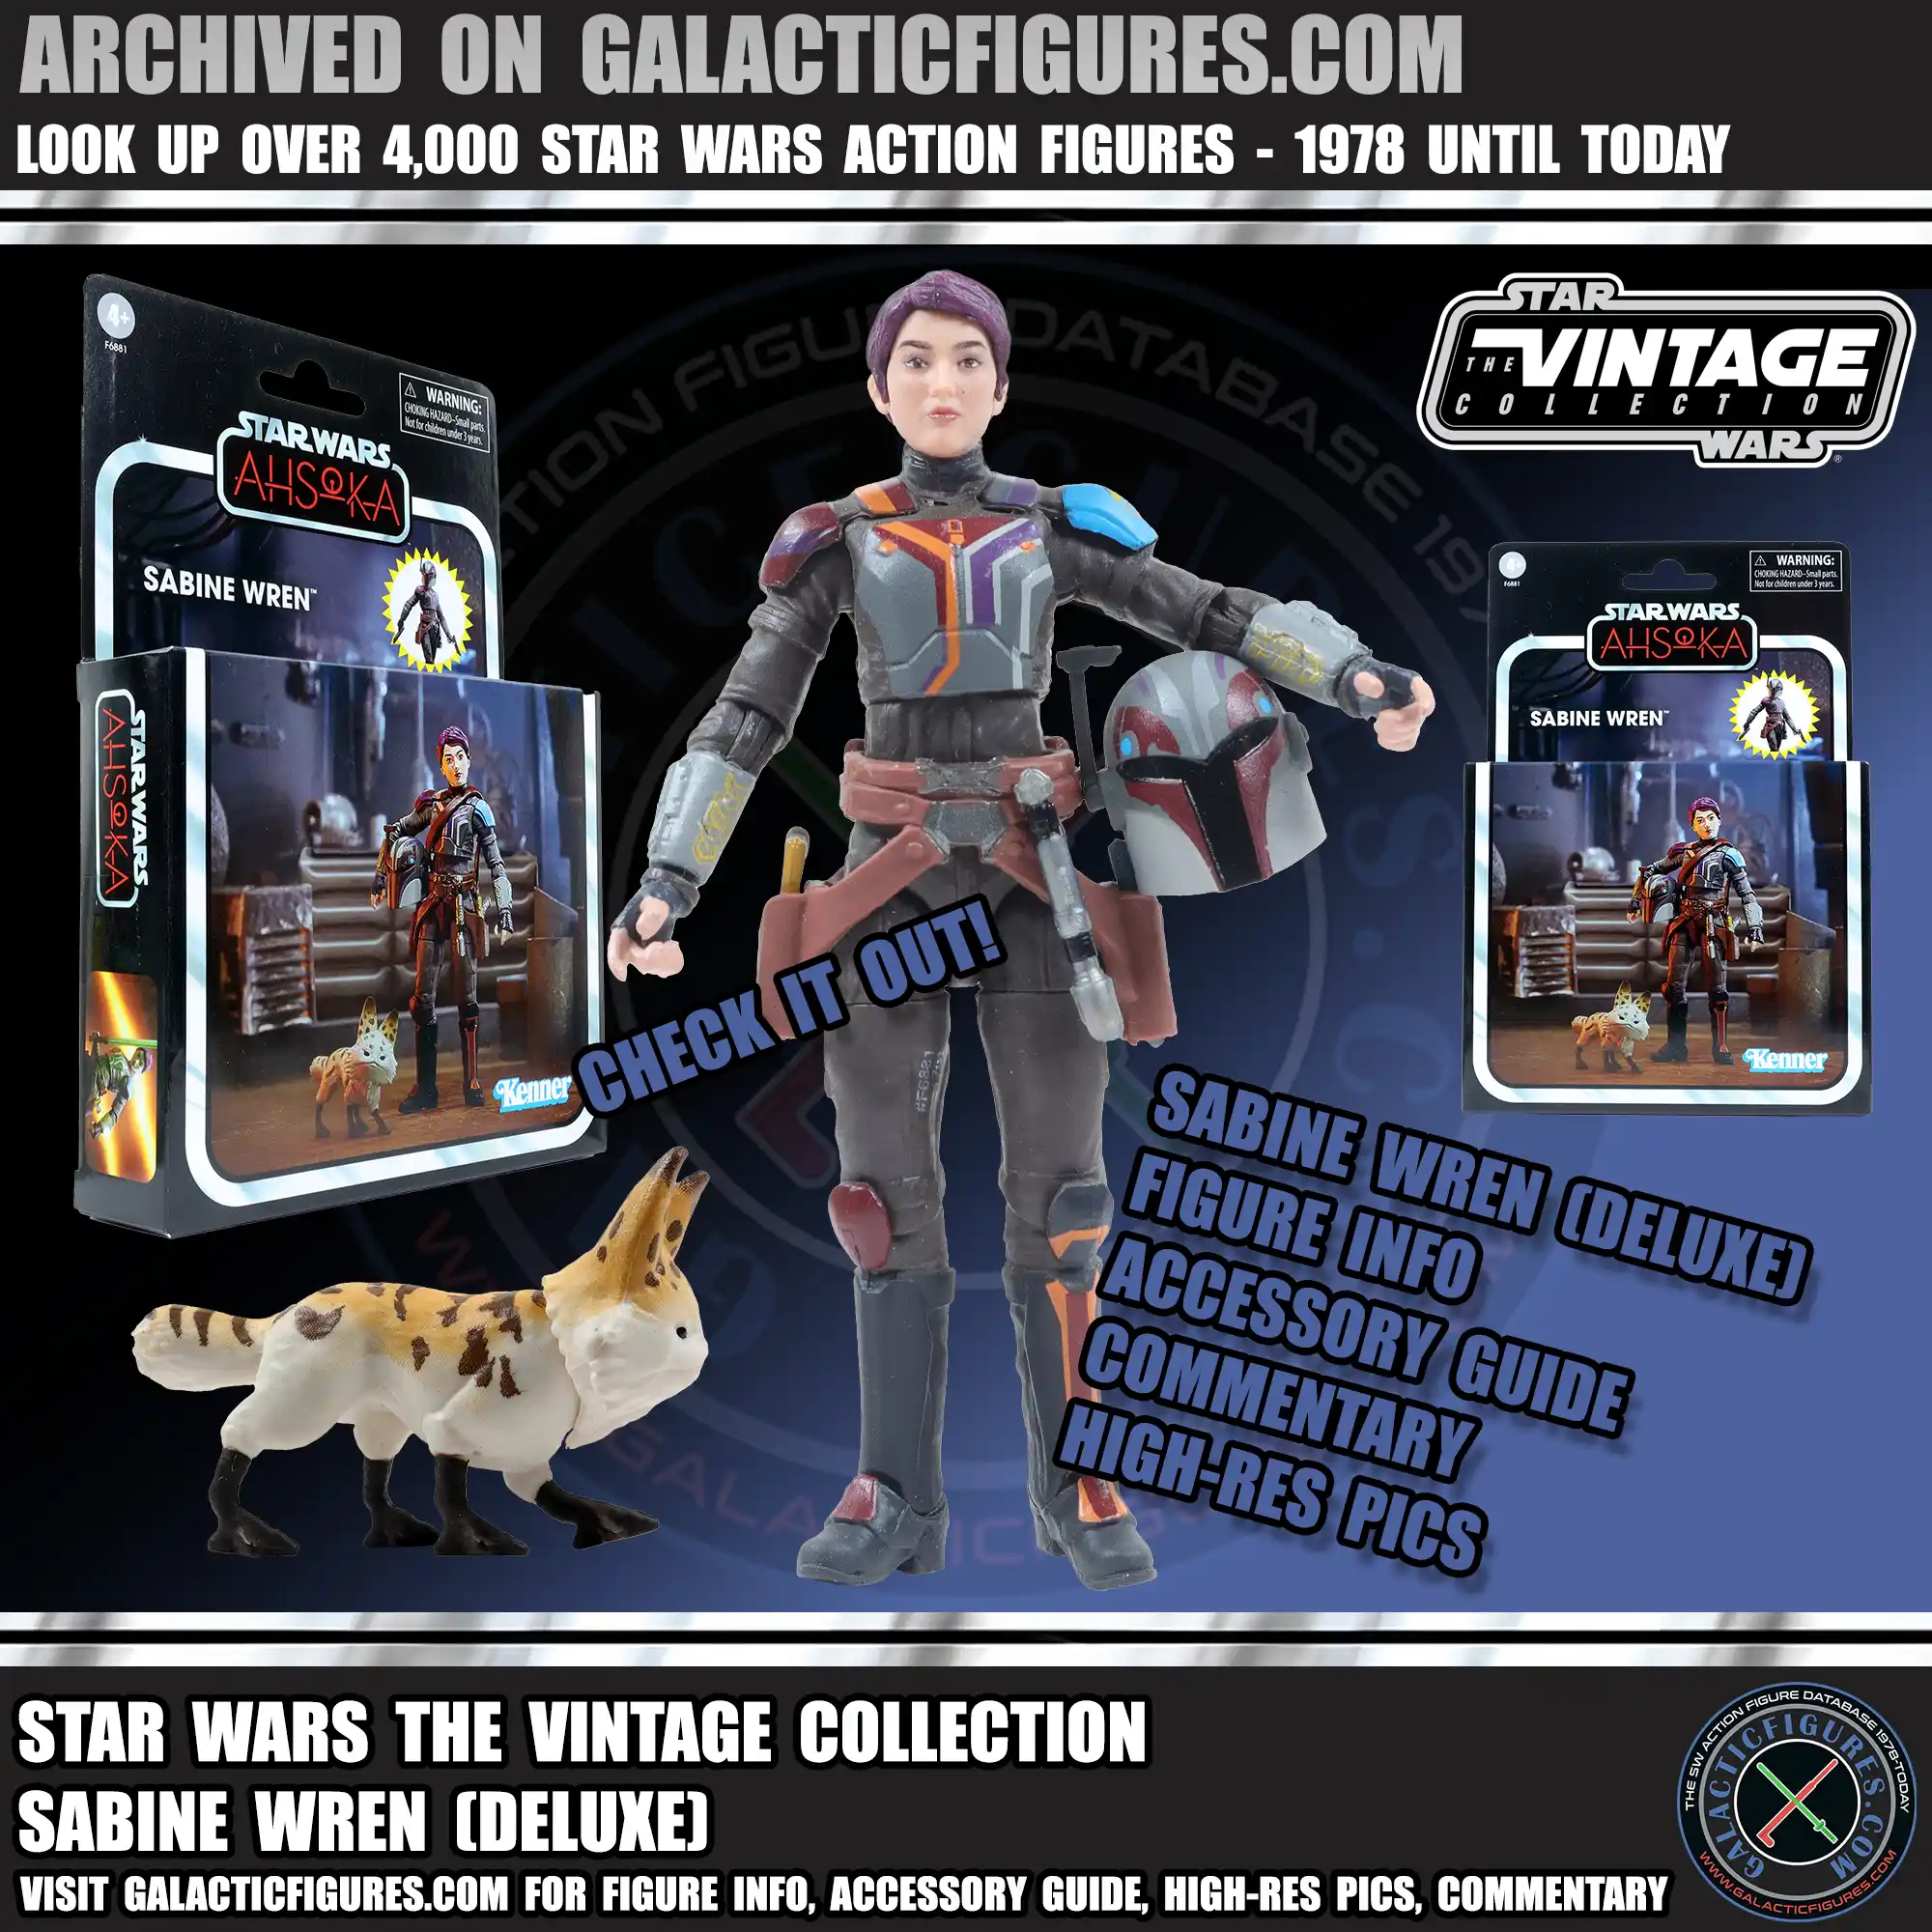 TVC Sabine Wren Deluxe Added - Check It Out!